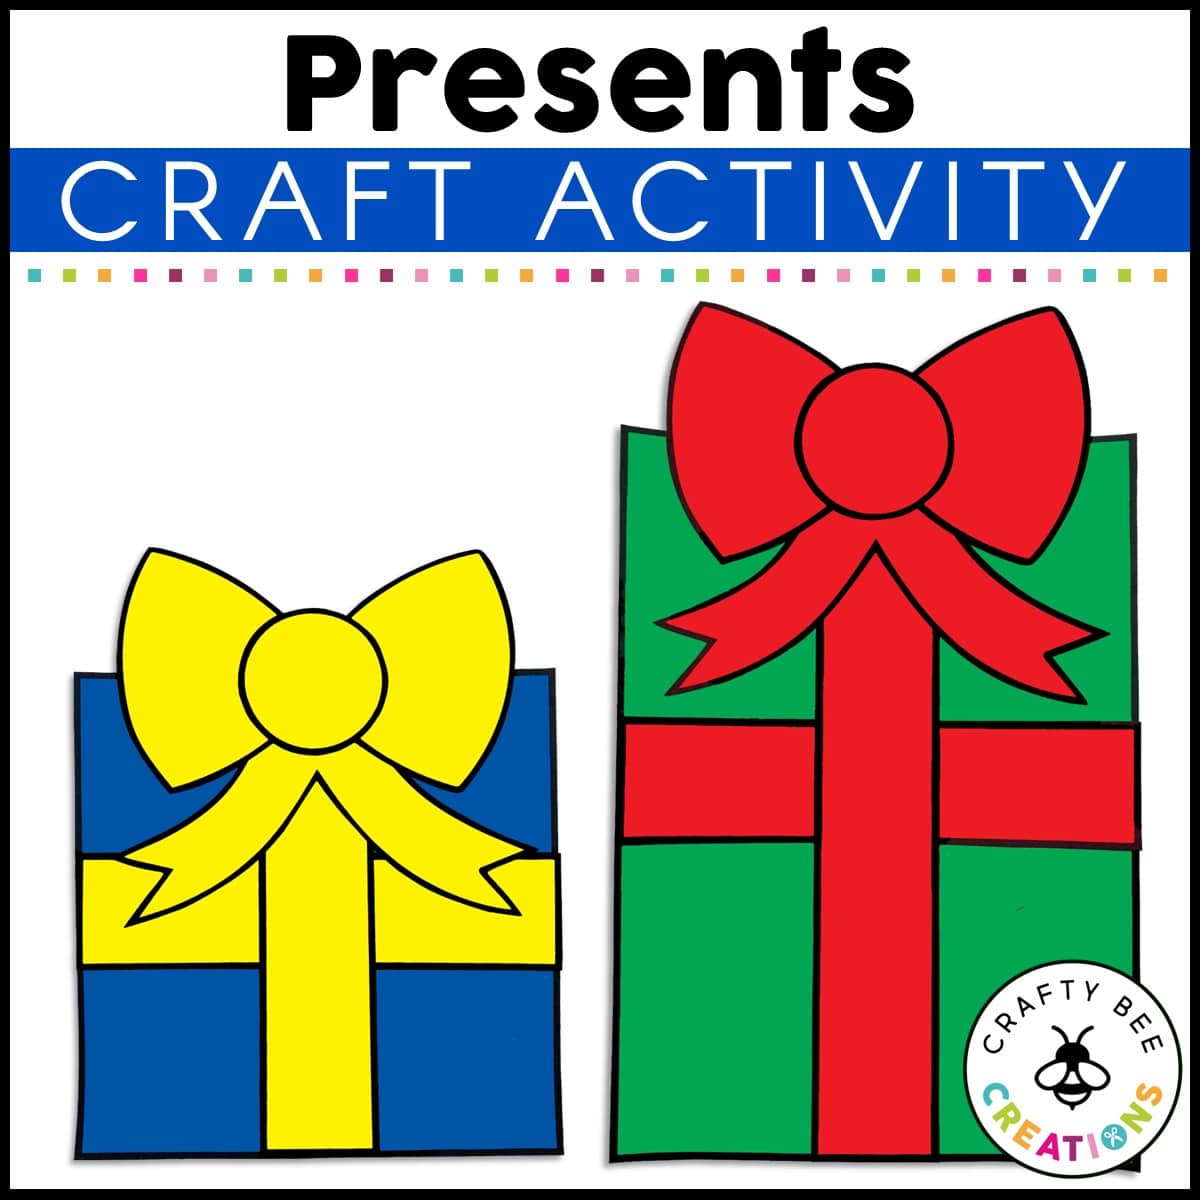 https://craftybeecreations.com/wp-content/uploads/2021/11/Presents-Craft-Square-Cover.jpg